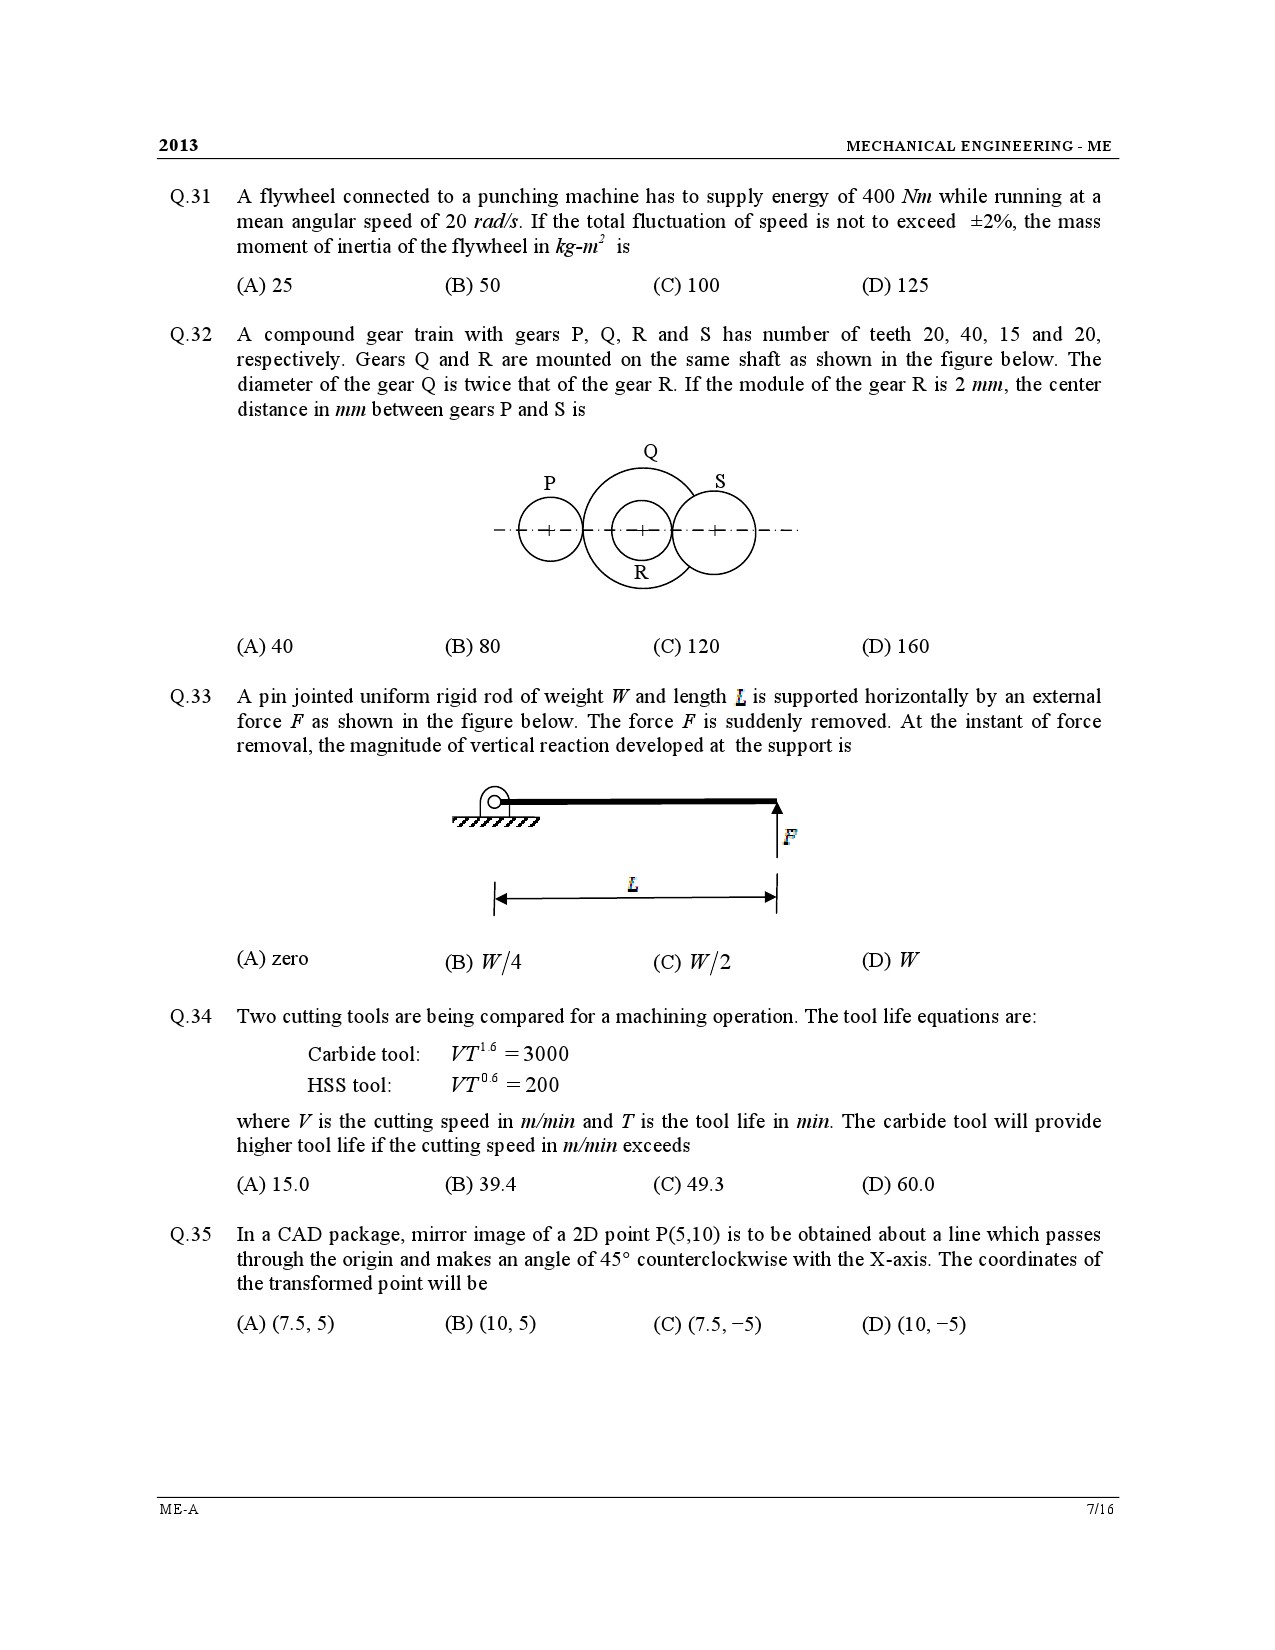 GATE Exam Question Paper 2013 Mechanical Engineering 7